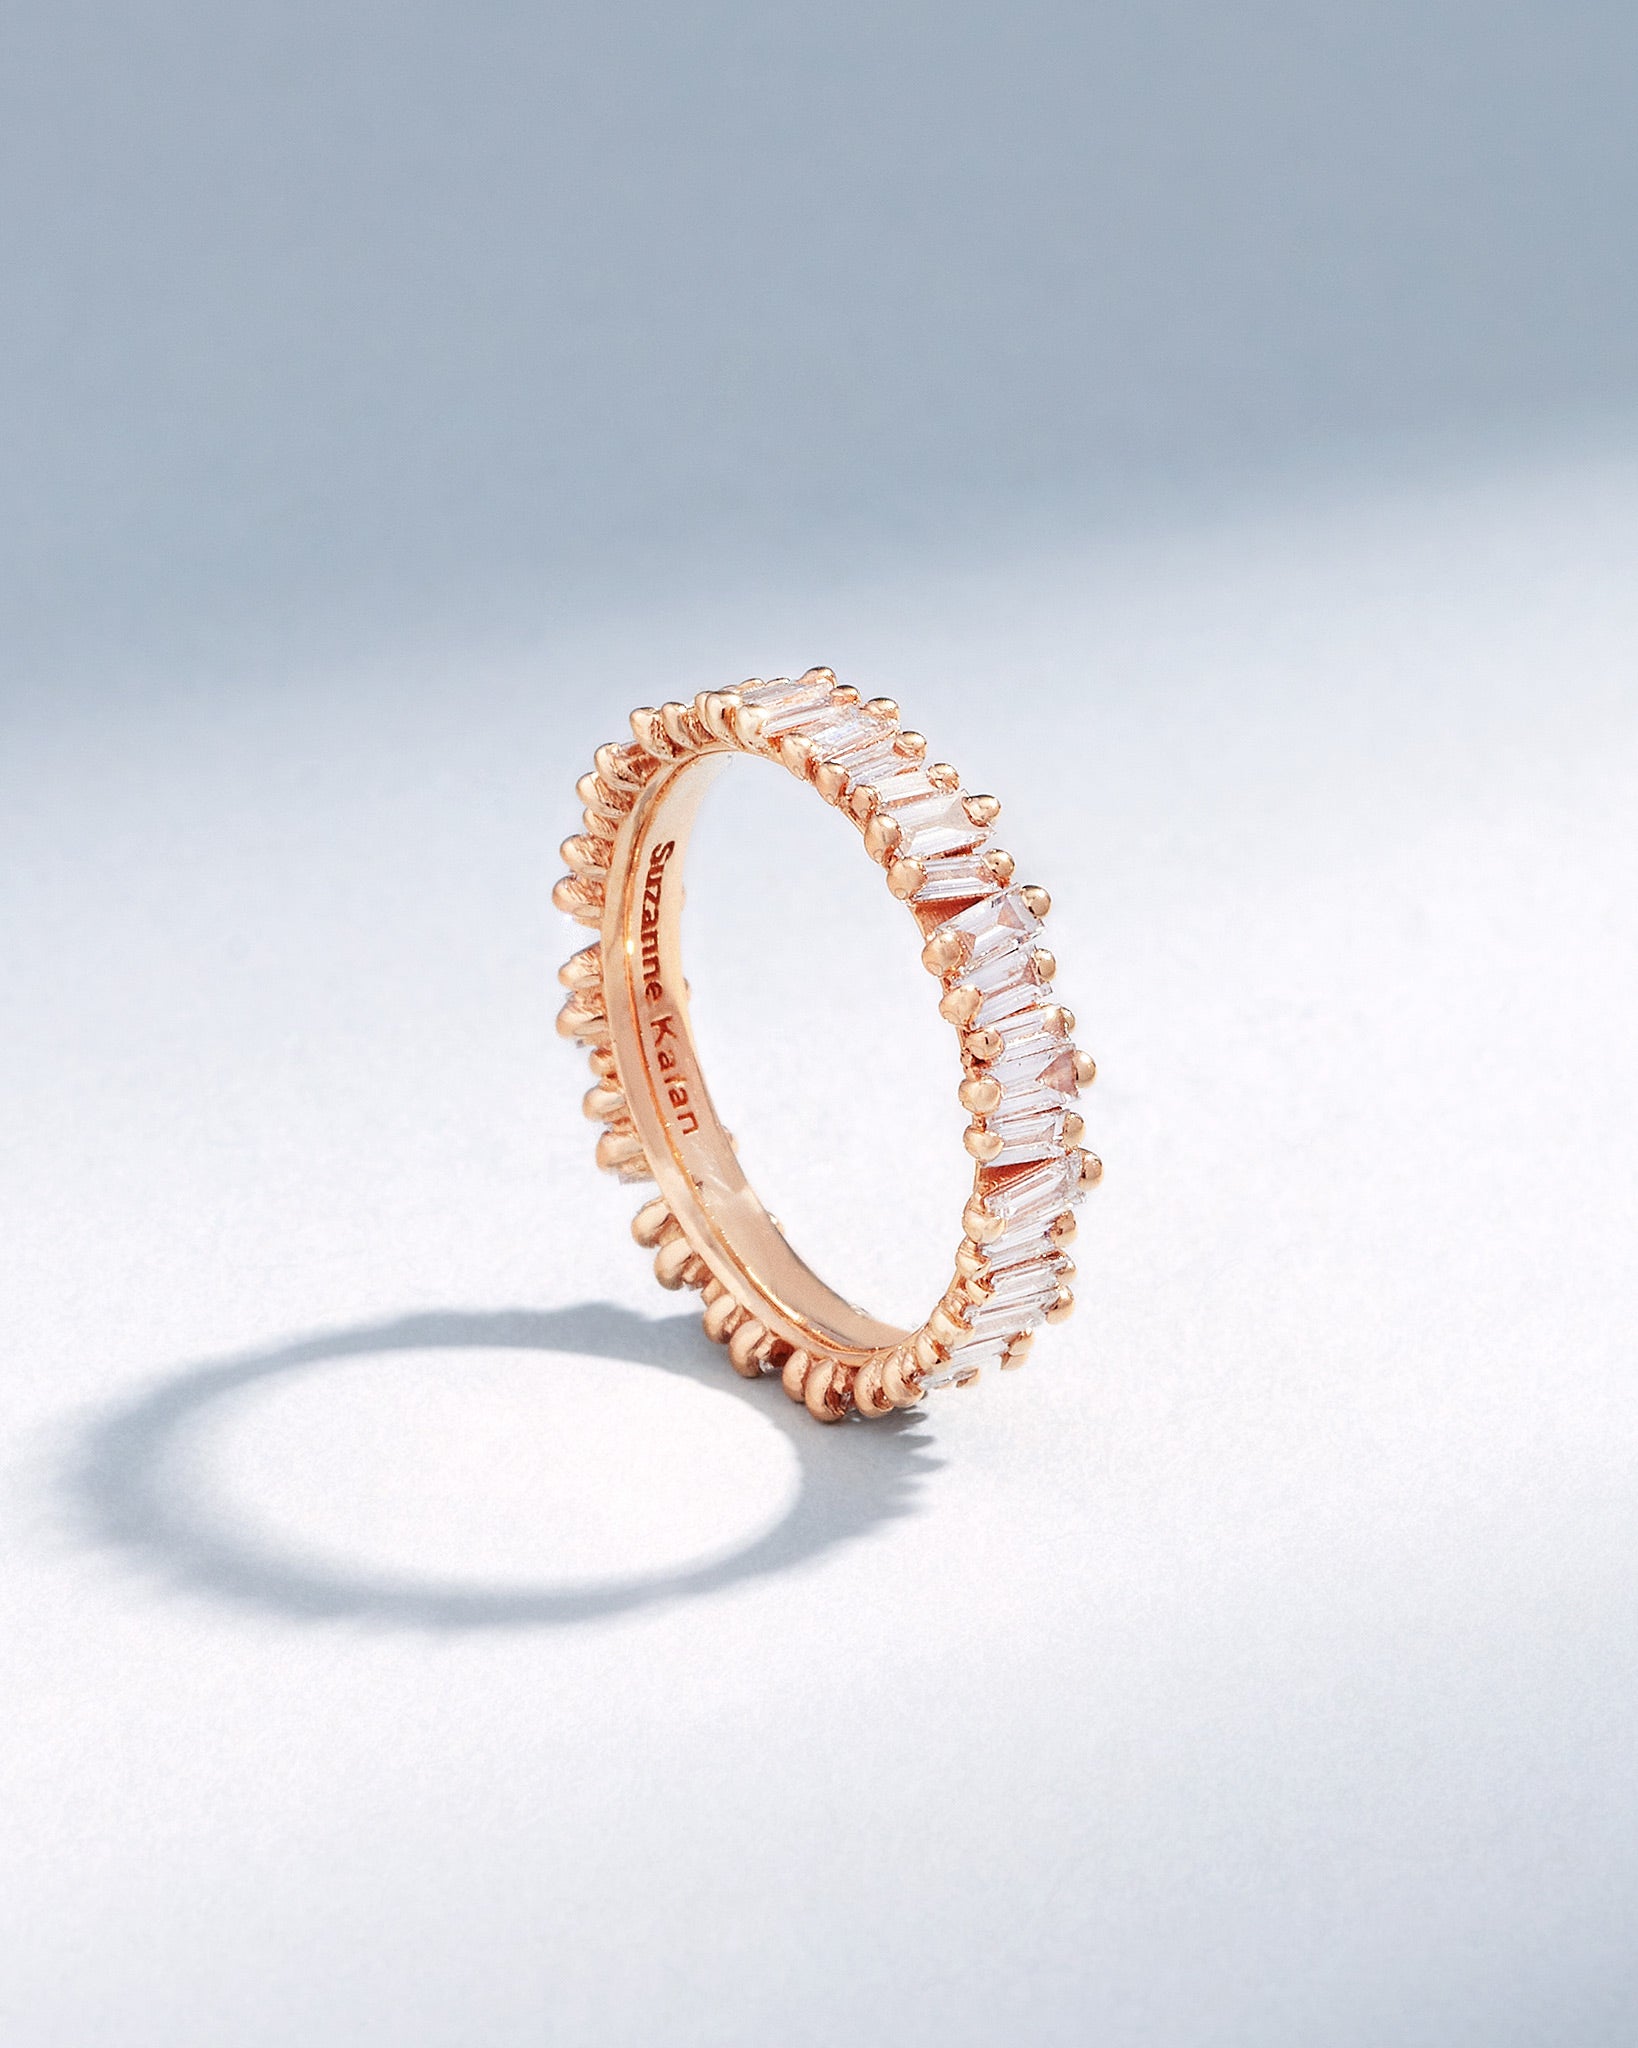 Suzanne Kalan Classic Diamond Eternity Band in 18k rose gold